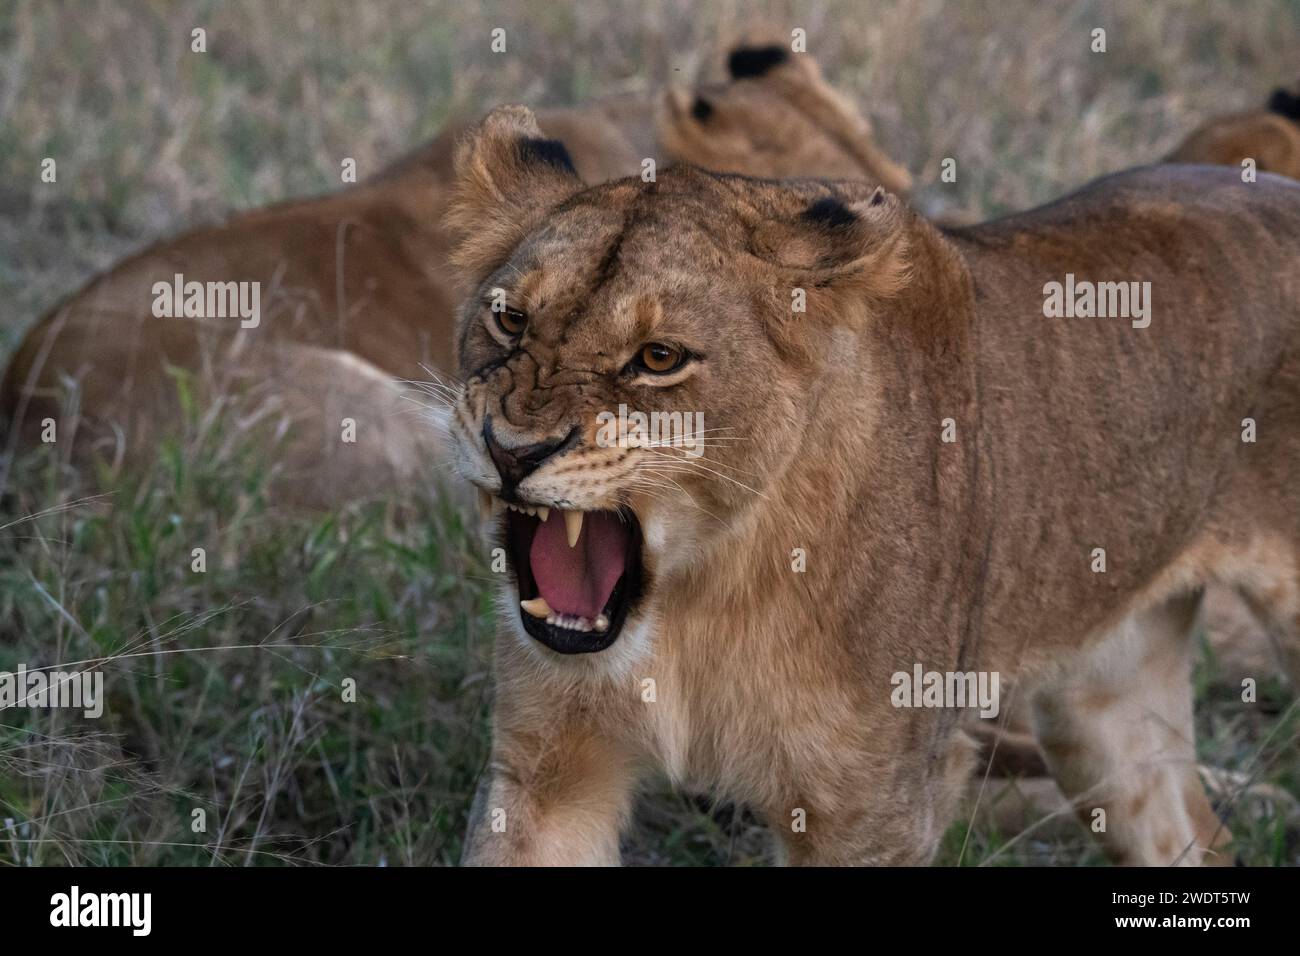 Lioness (Panthera leo), Sabi Sands Game Reserve, South Africa, Africa Stock Photo